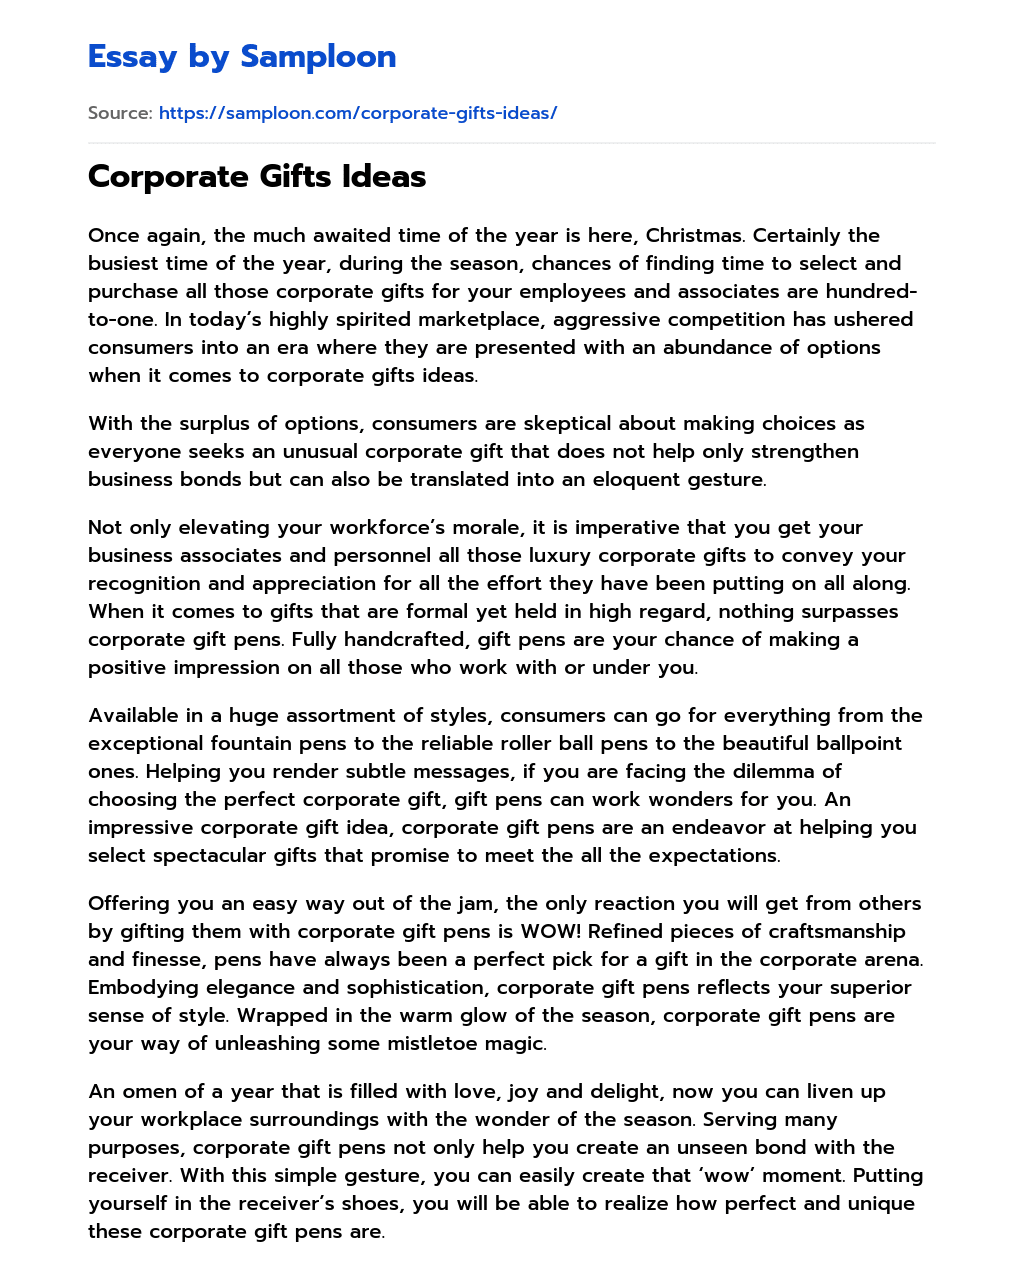 Corporate Gifts Ideas essay